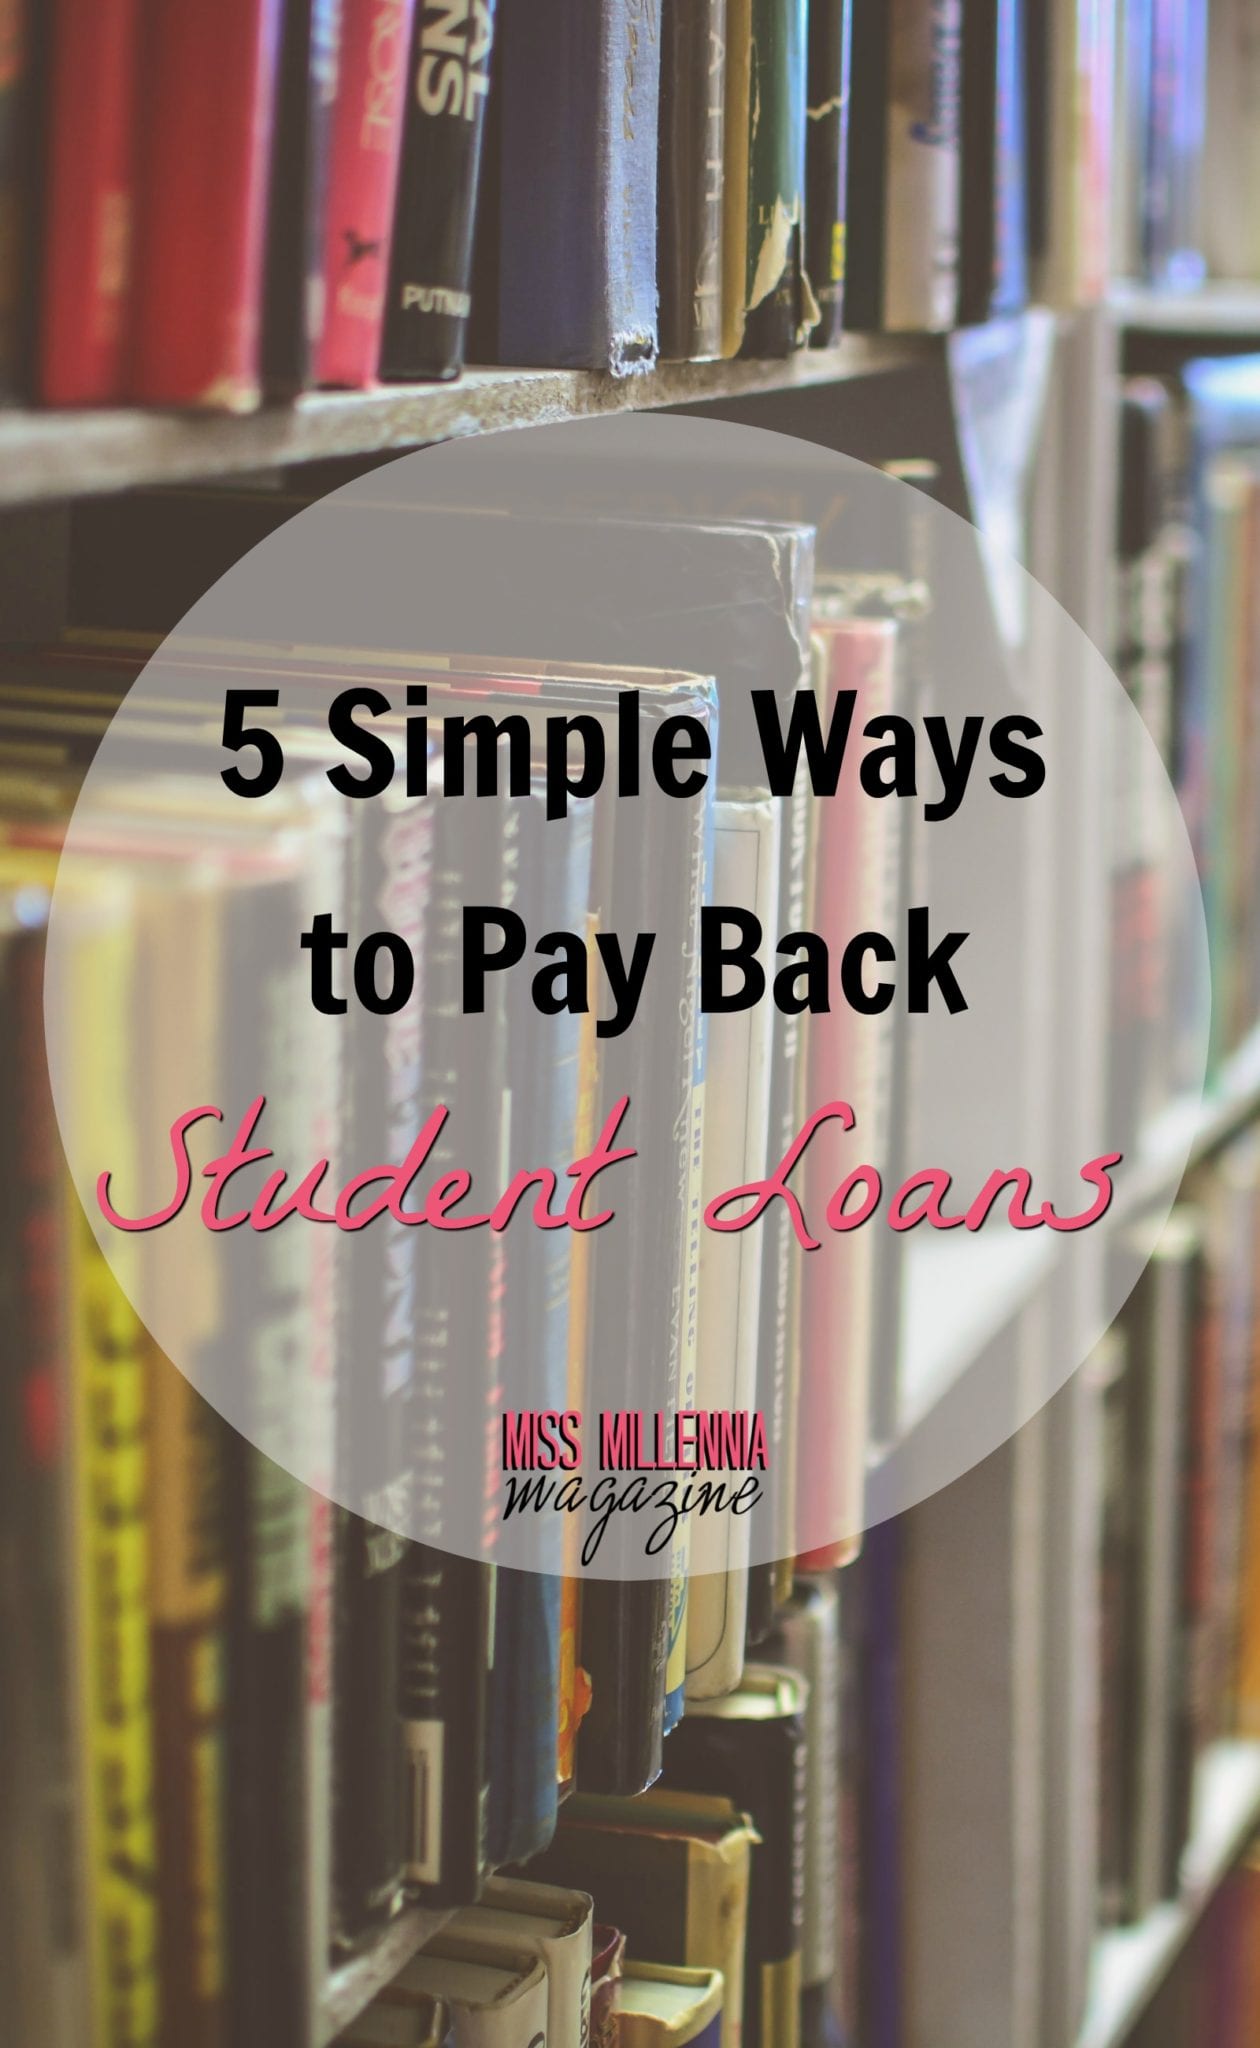 5-simple-ways-to-pay-back-student-loans